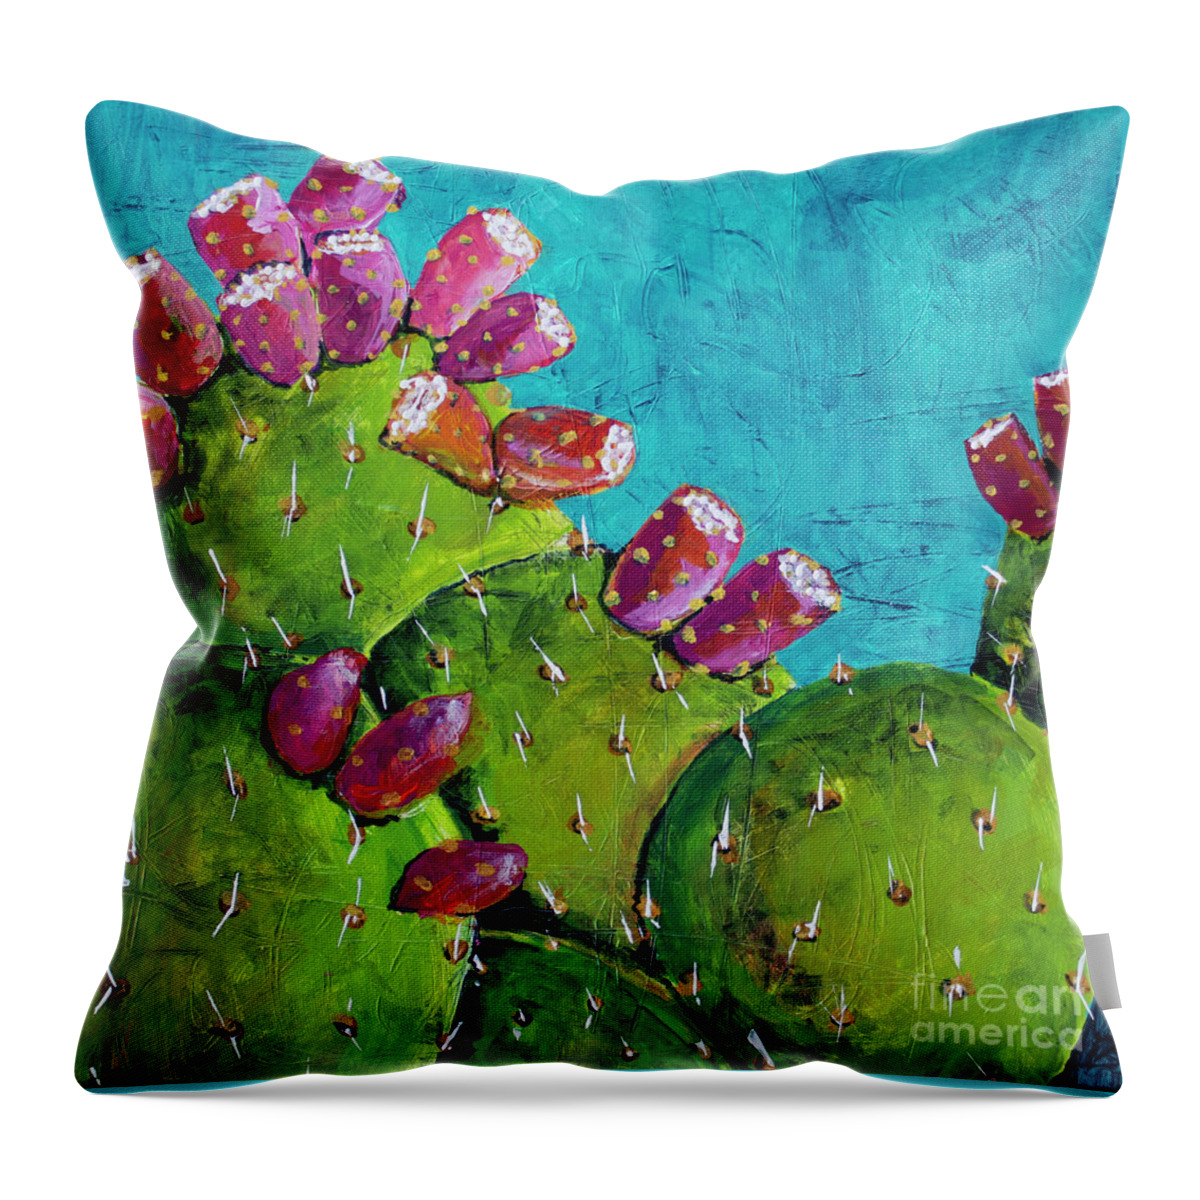 Prickly Pear Throw Pillow featuring the painting Midnight Prickly Pear II by Robin Valenzuela